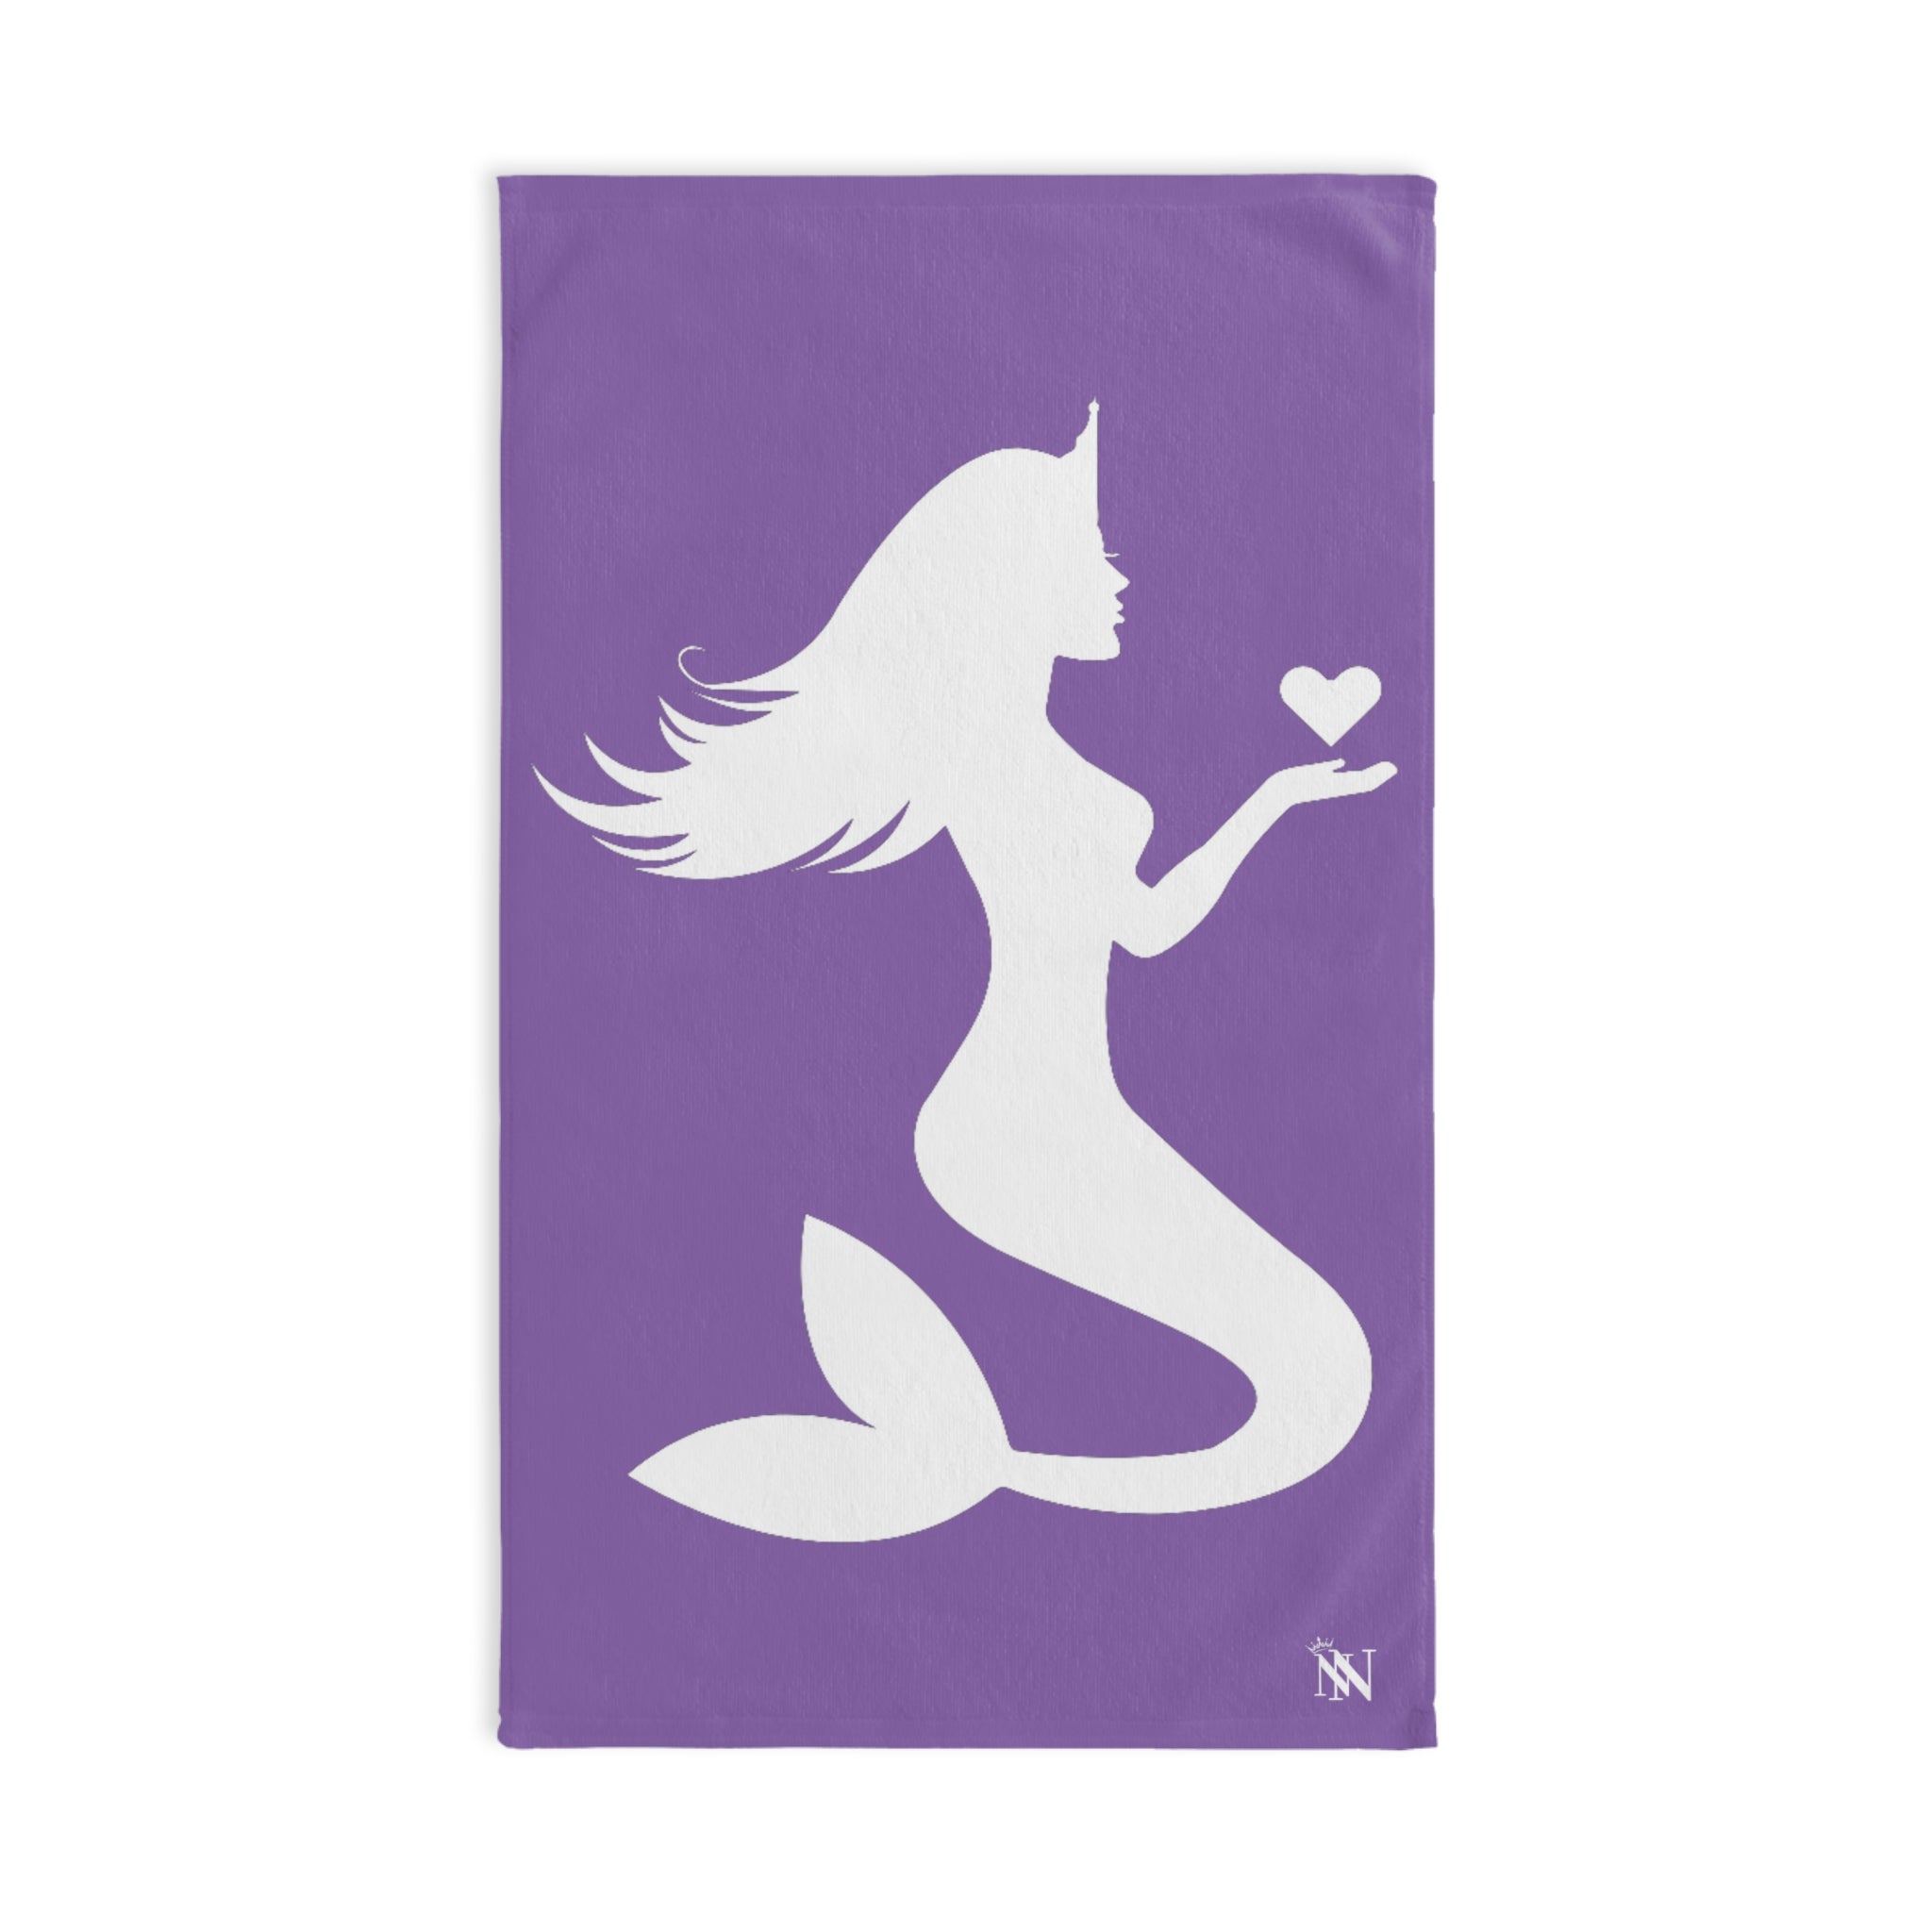 Pray Mermaid Heart Lavendar | Funny Gifts for Men - Gifts for Him - Birthday Gifts for Men, Him, Husband, Boyfriend, New Couple Gifts, Fathers & Valentines Day Gifts, Hand Towels NECTAR NAPKINS